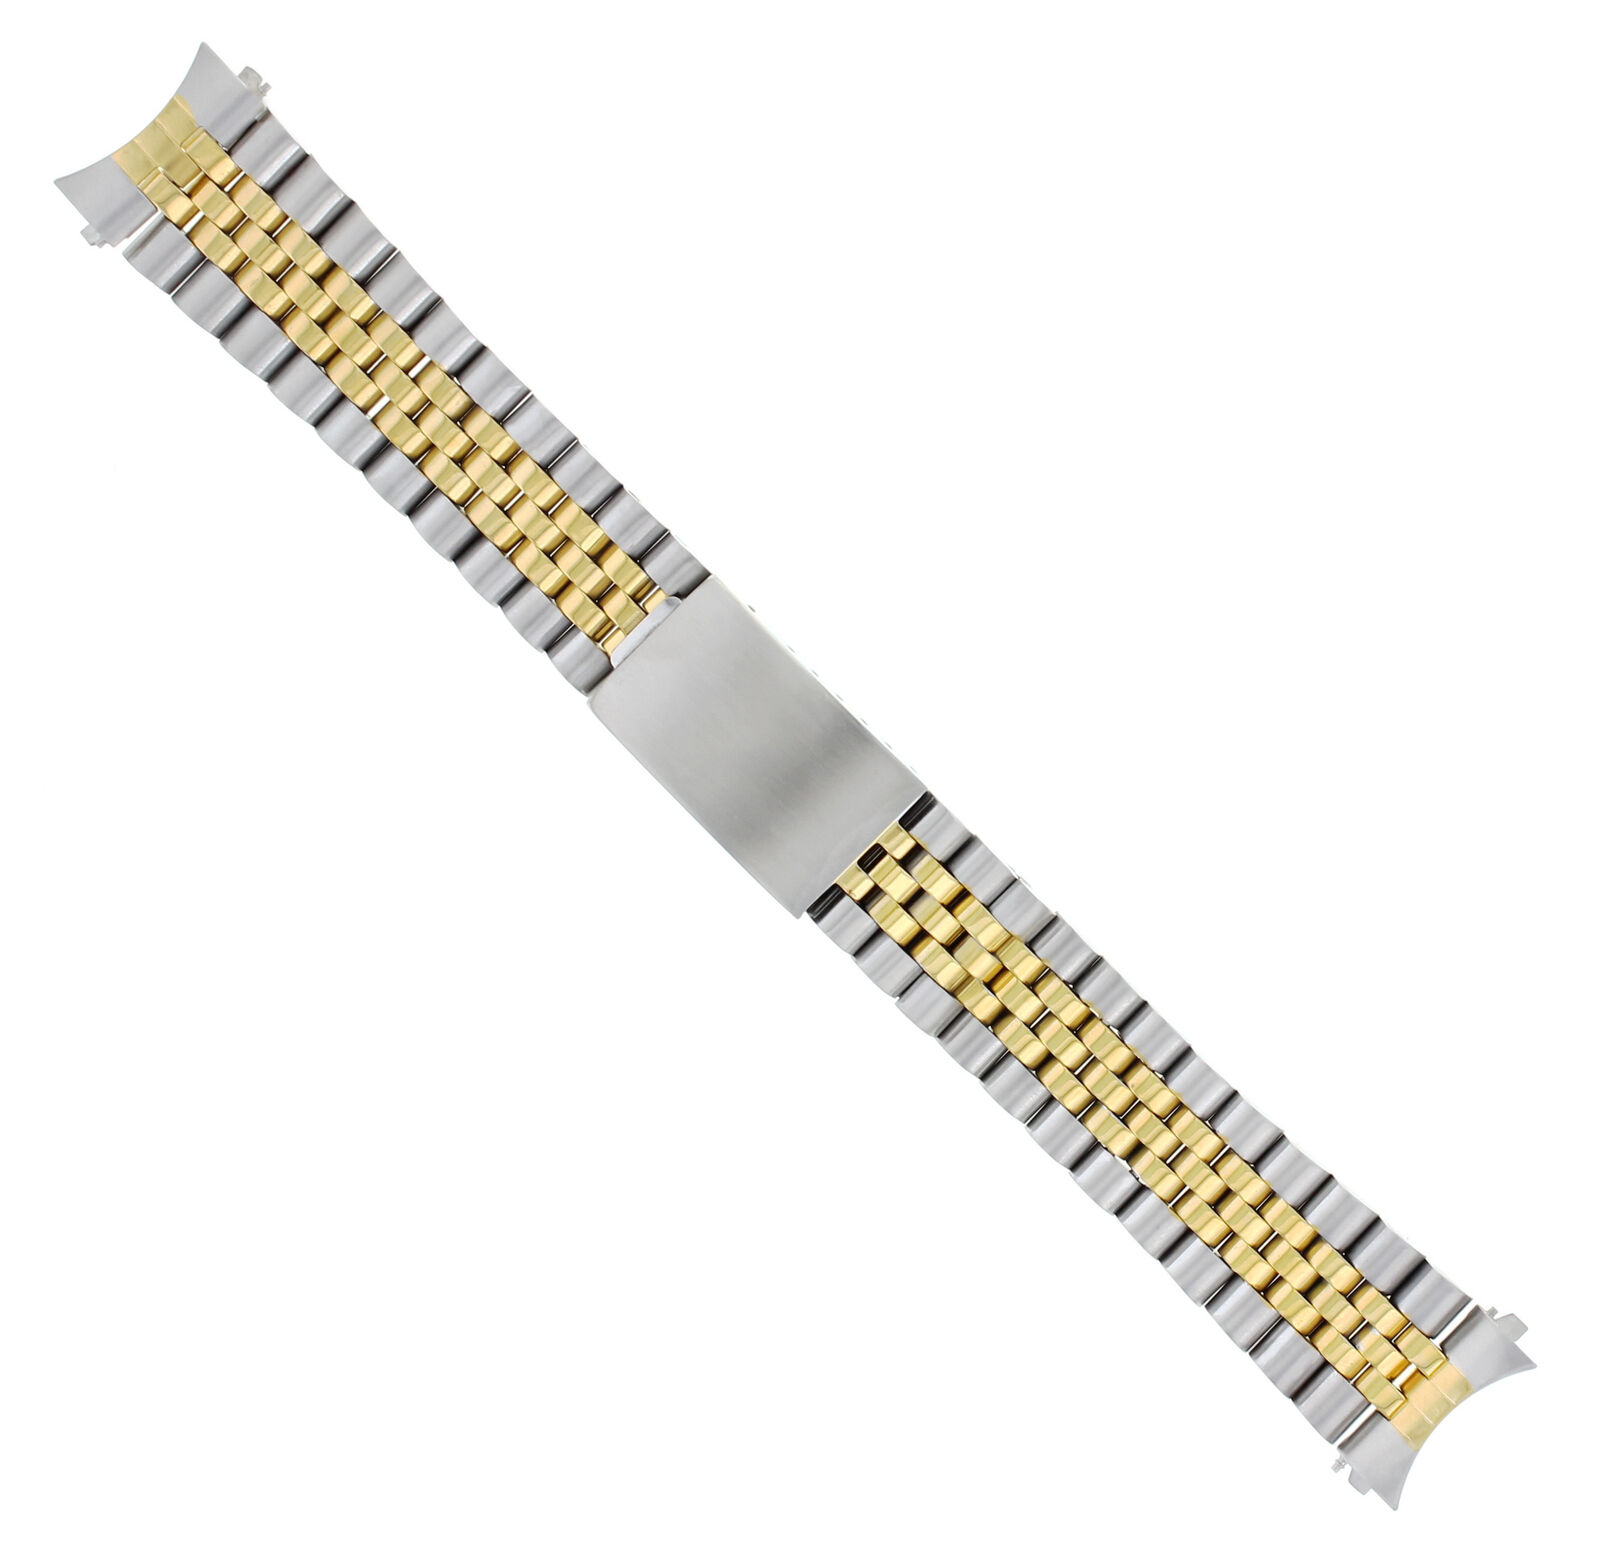 19MM JUBILEE WATCH REPLACEMENT BAND BRACELET FOR ROLEX TUDOR PRINCE TWO TONE